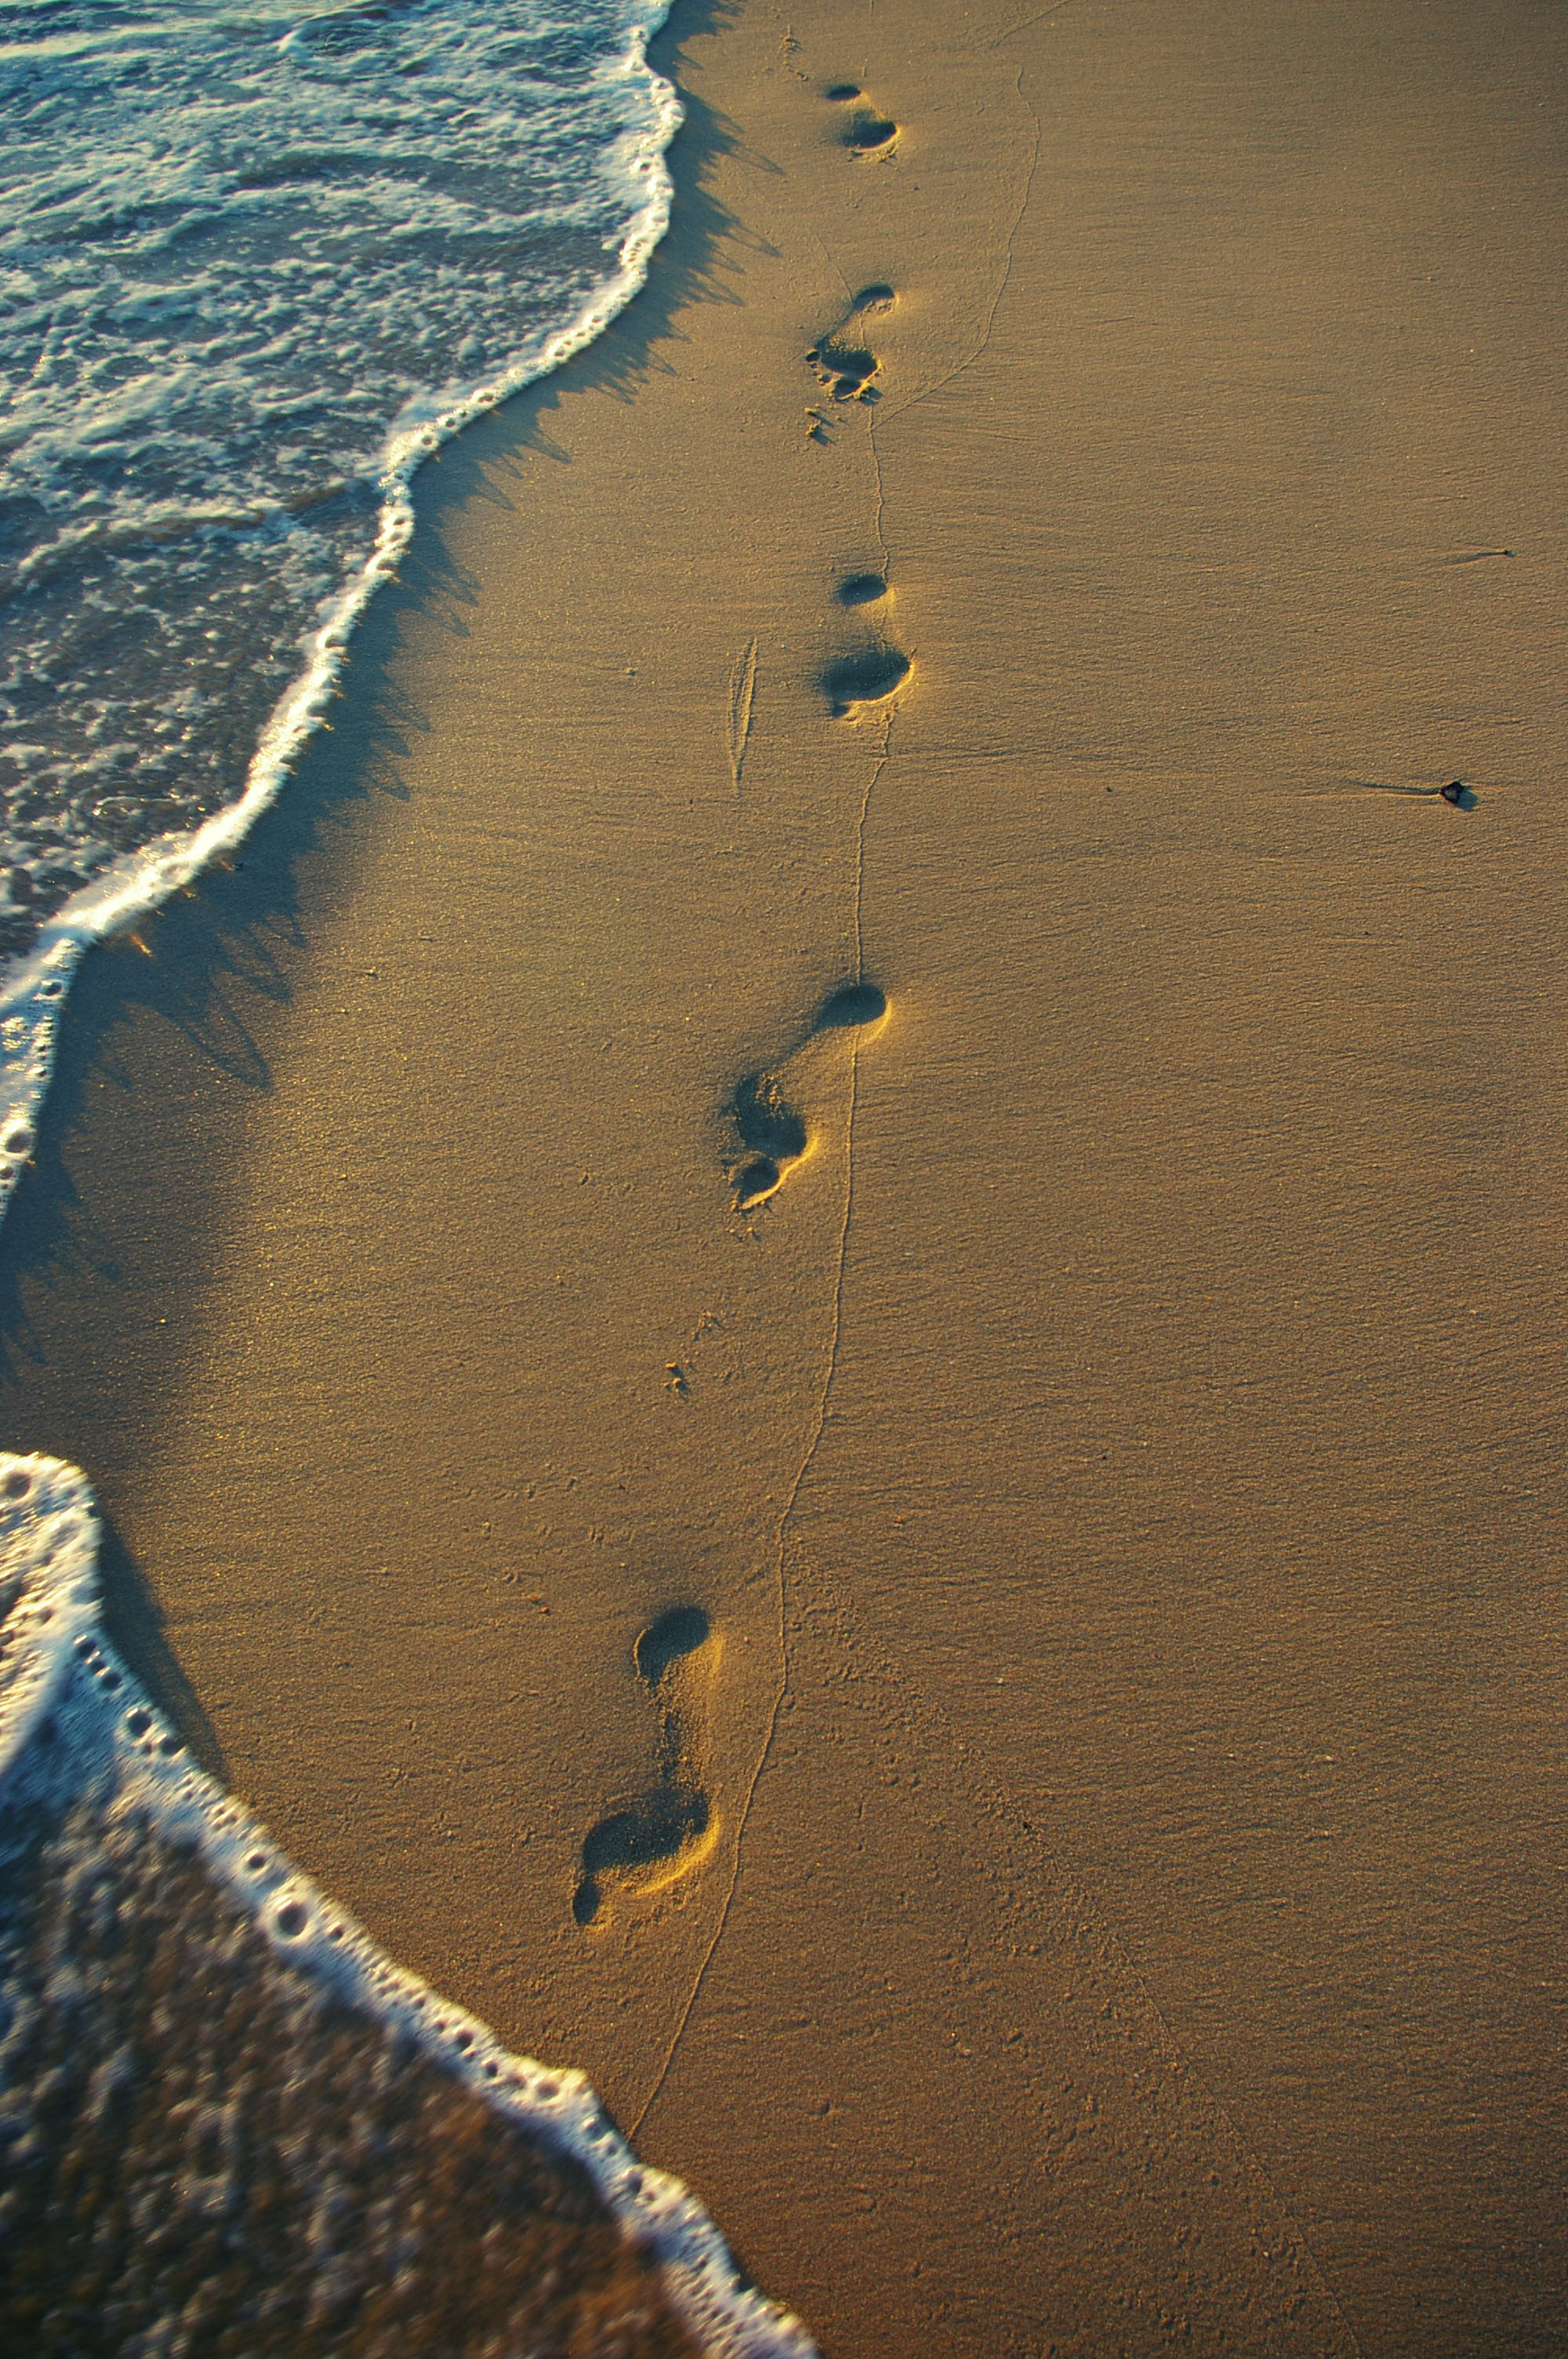 Footprints In The Sand Wallpapers